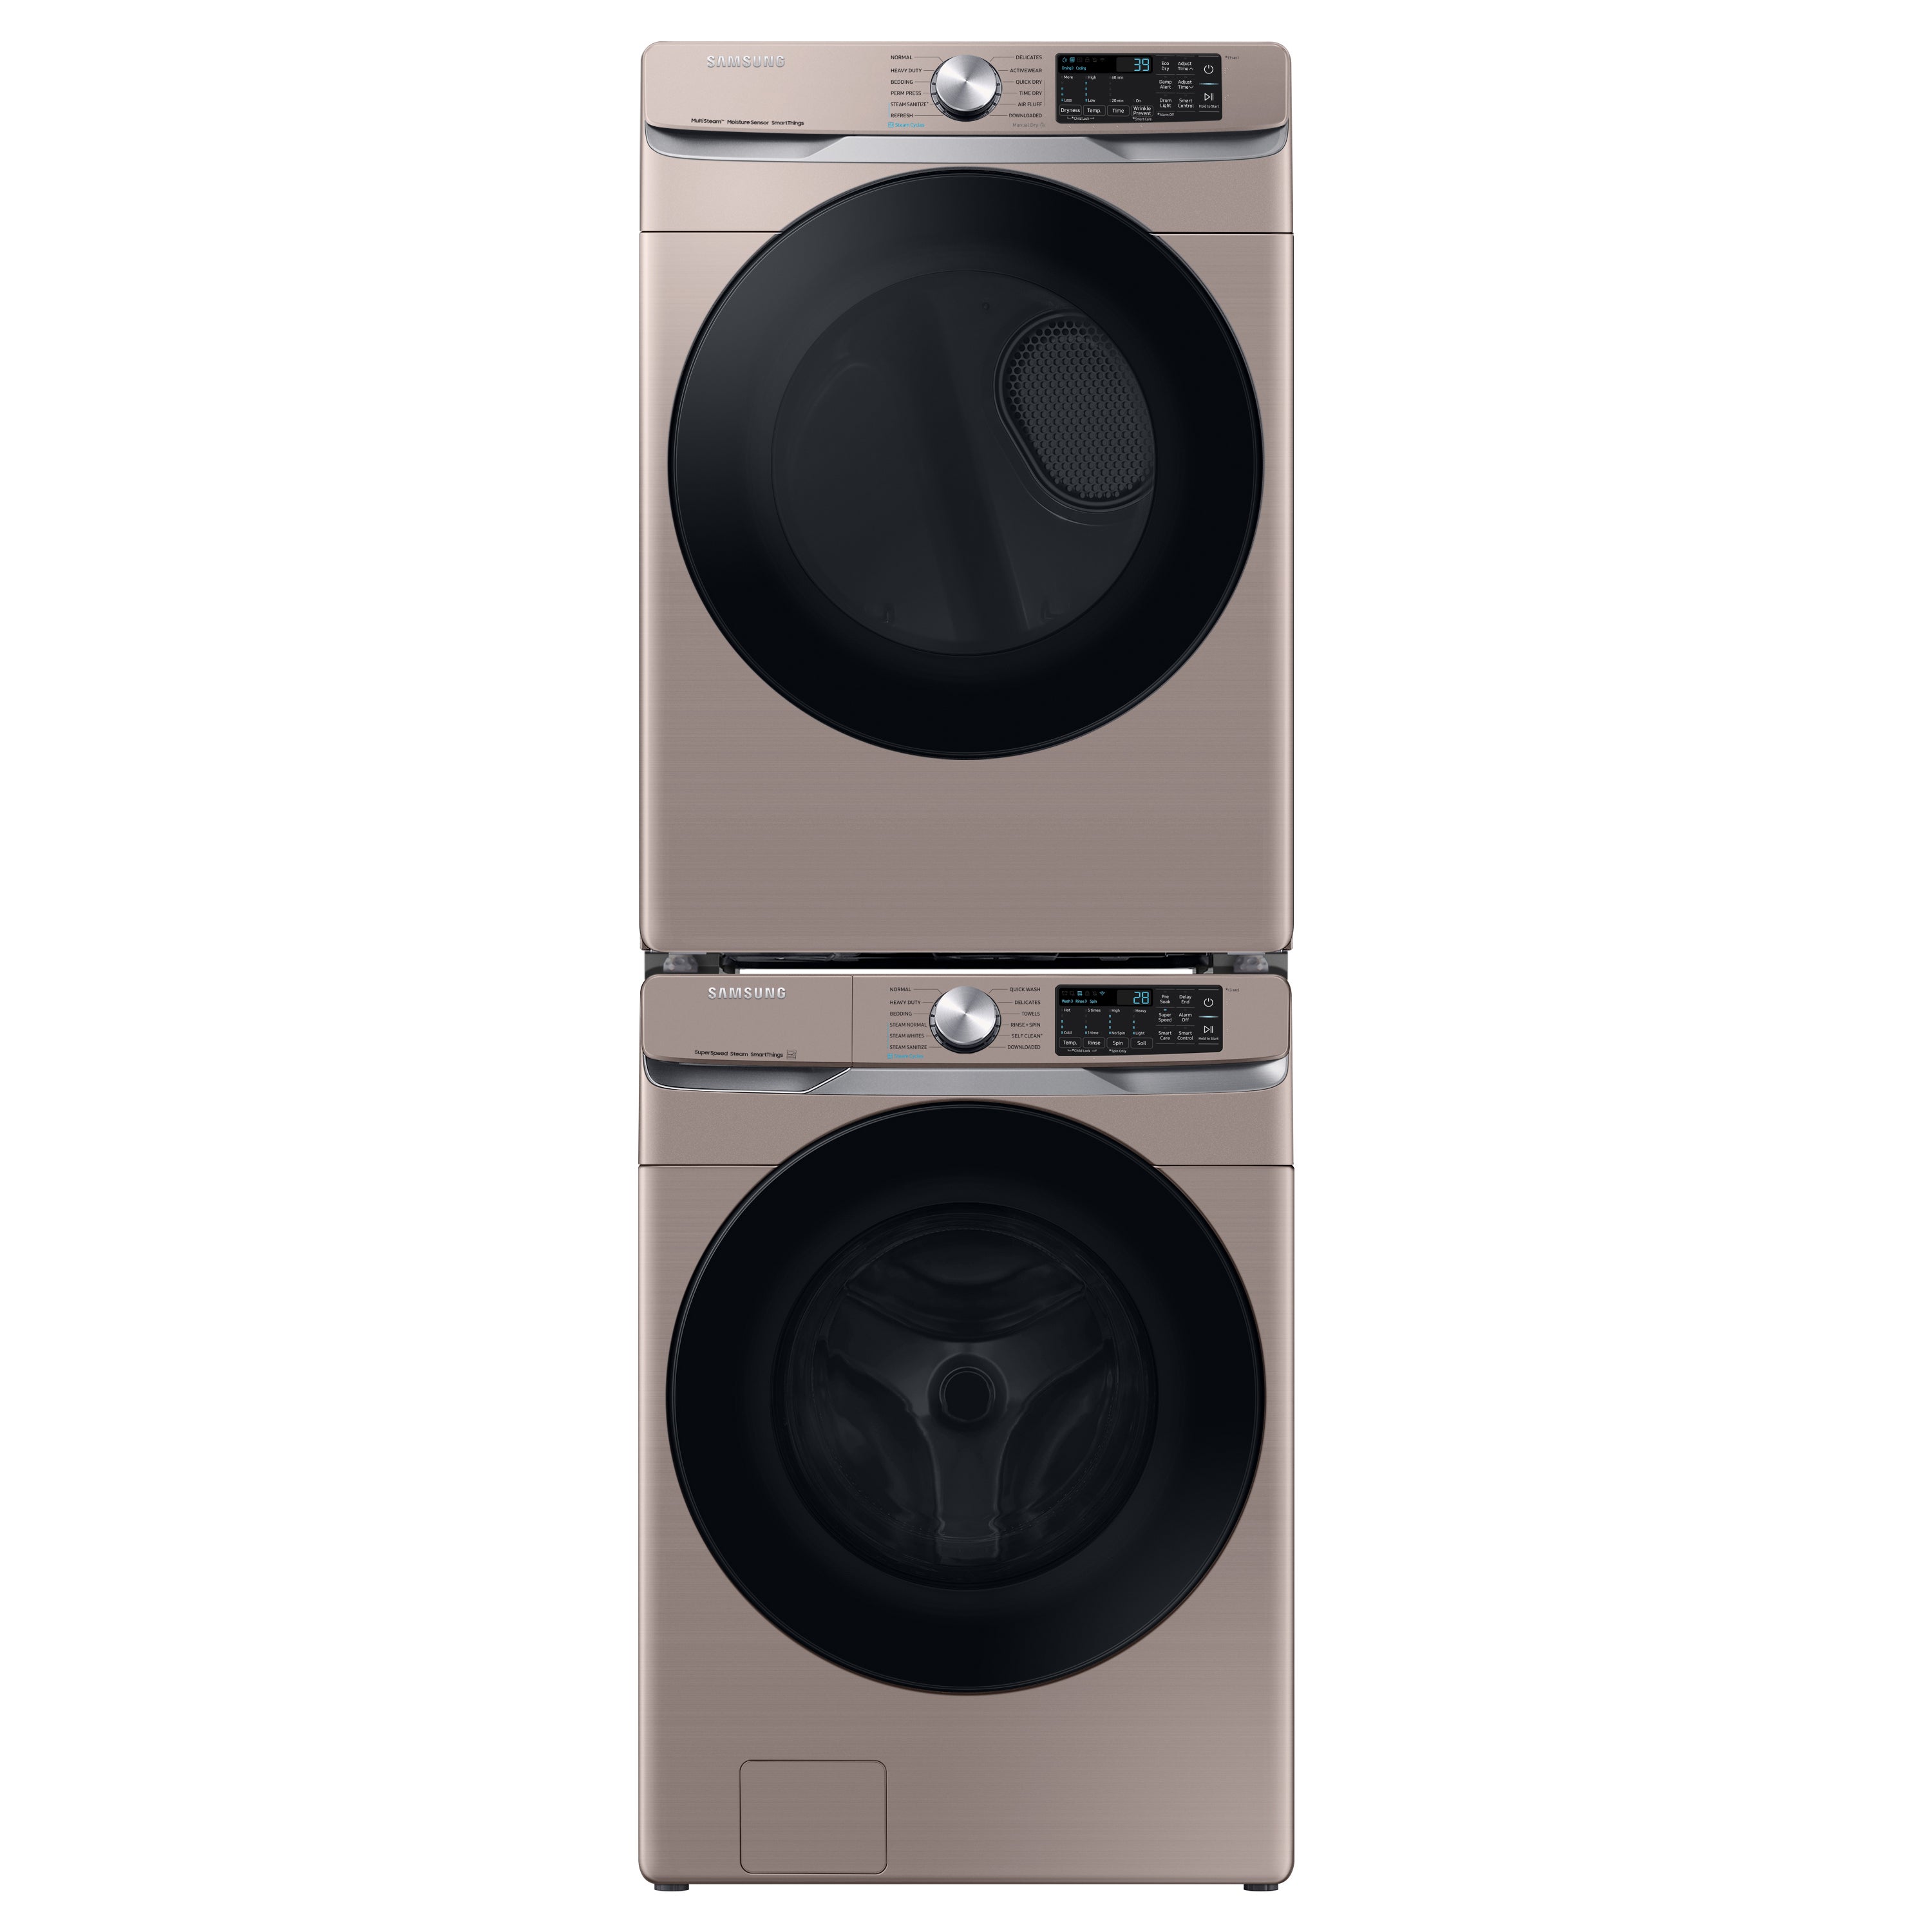 WF45R6100AC in Champagne by Samsung in Hamilton, NJ - 4.5 cu. ft. Front  Load Washer with Steam in Champagne